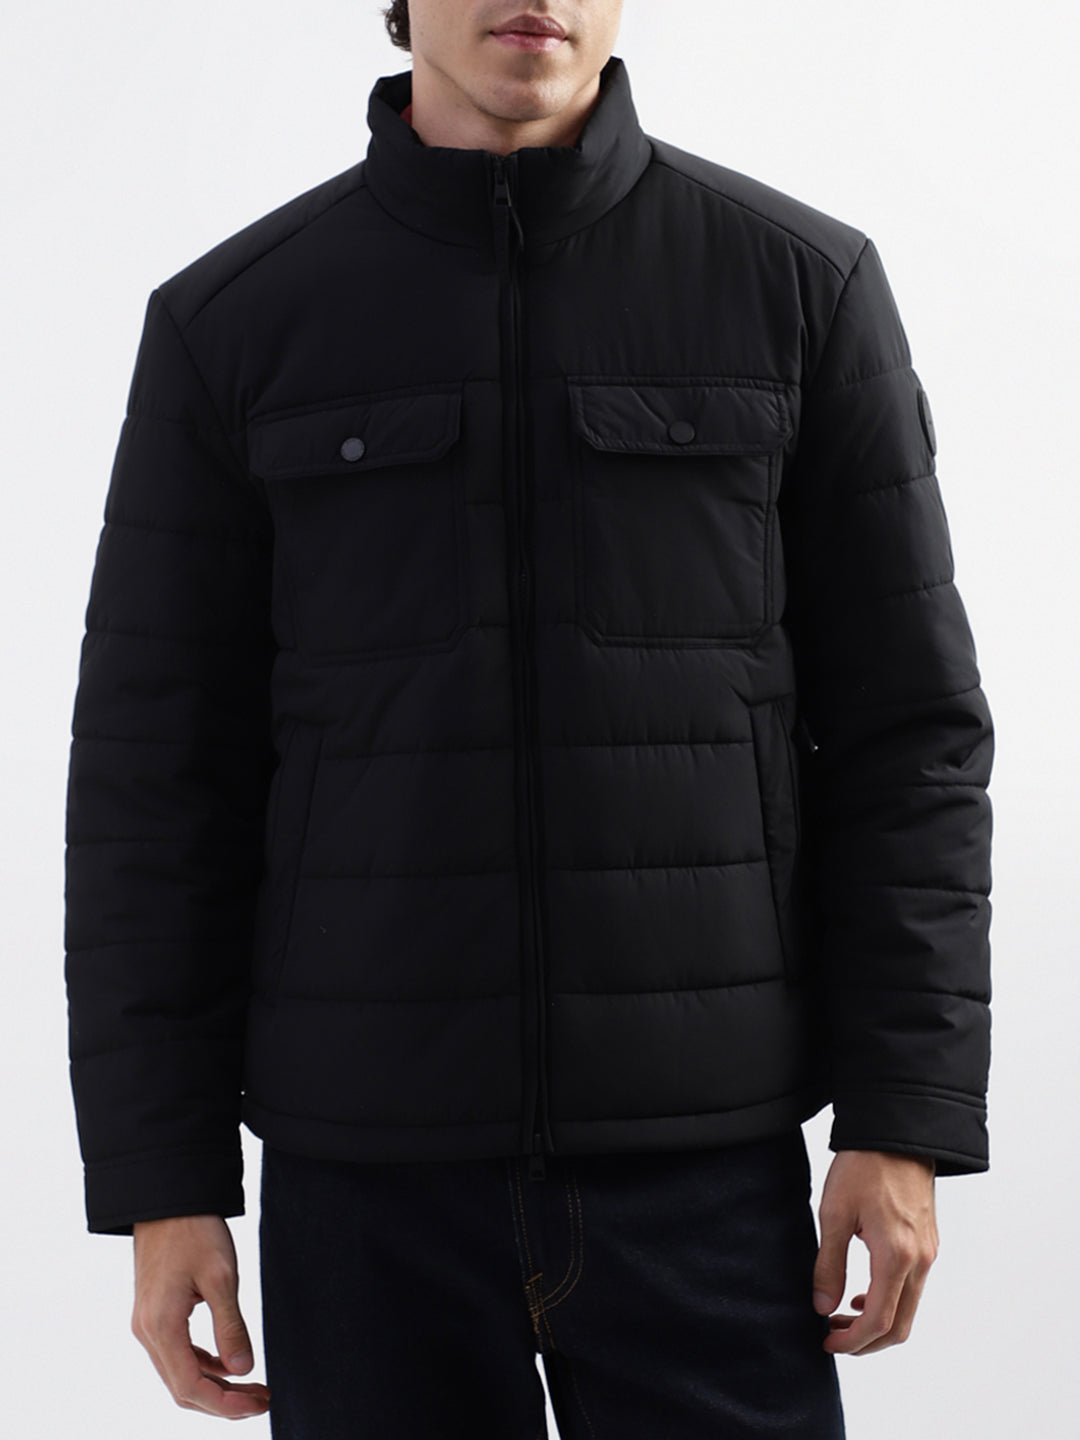 Black oversized vinyl down jacket with straps and logo | The Kooples - US